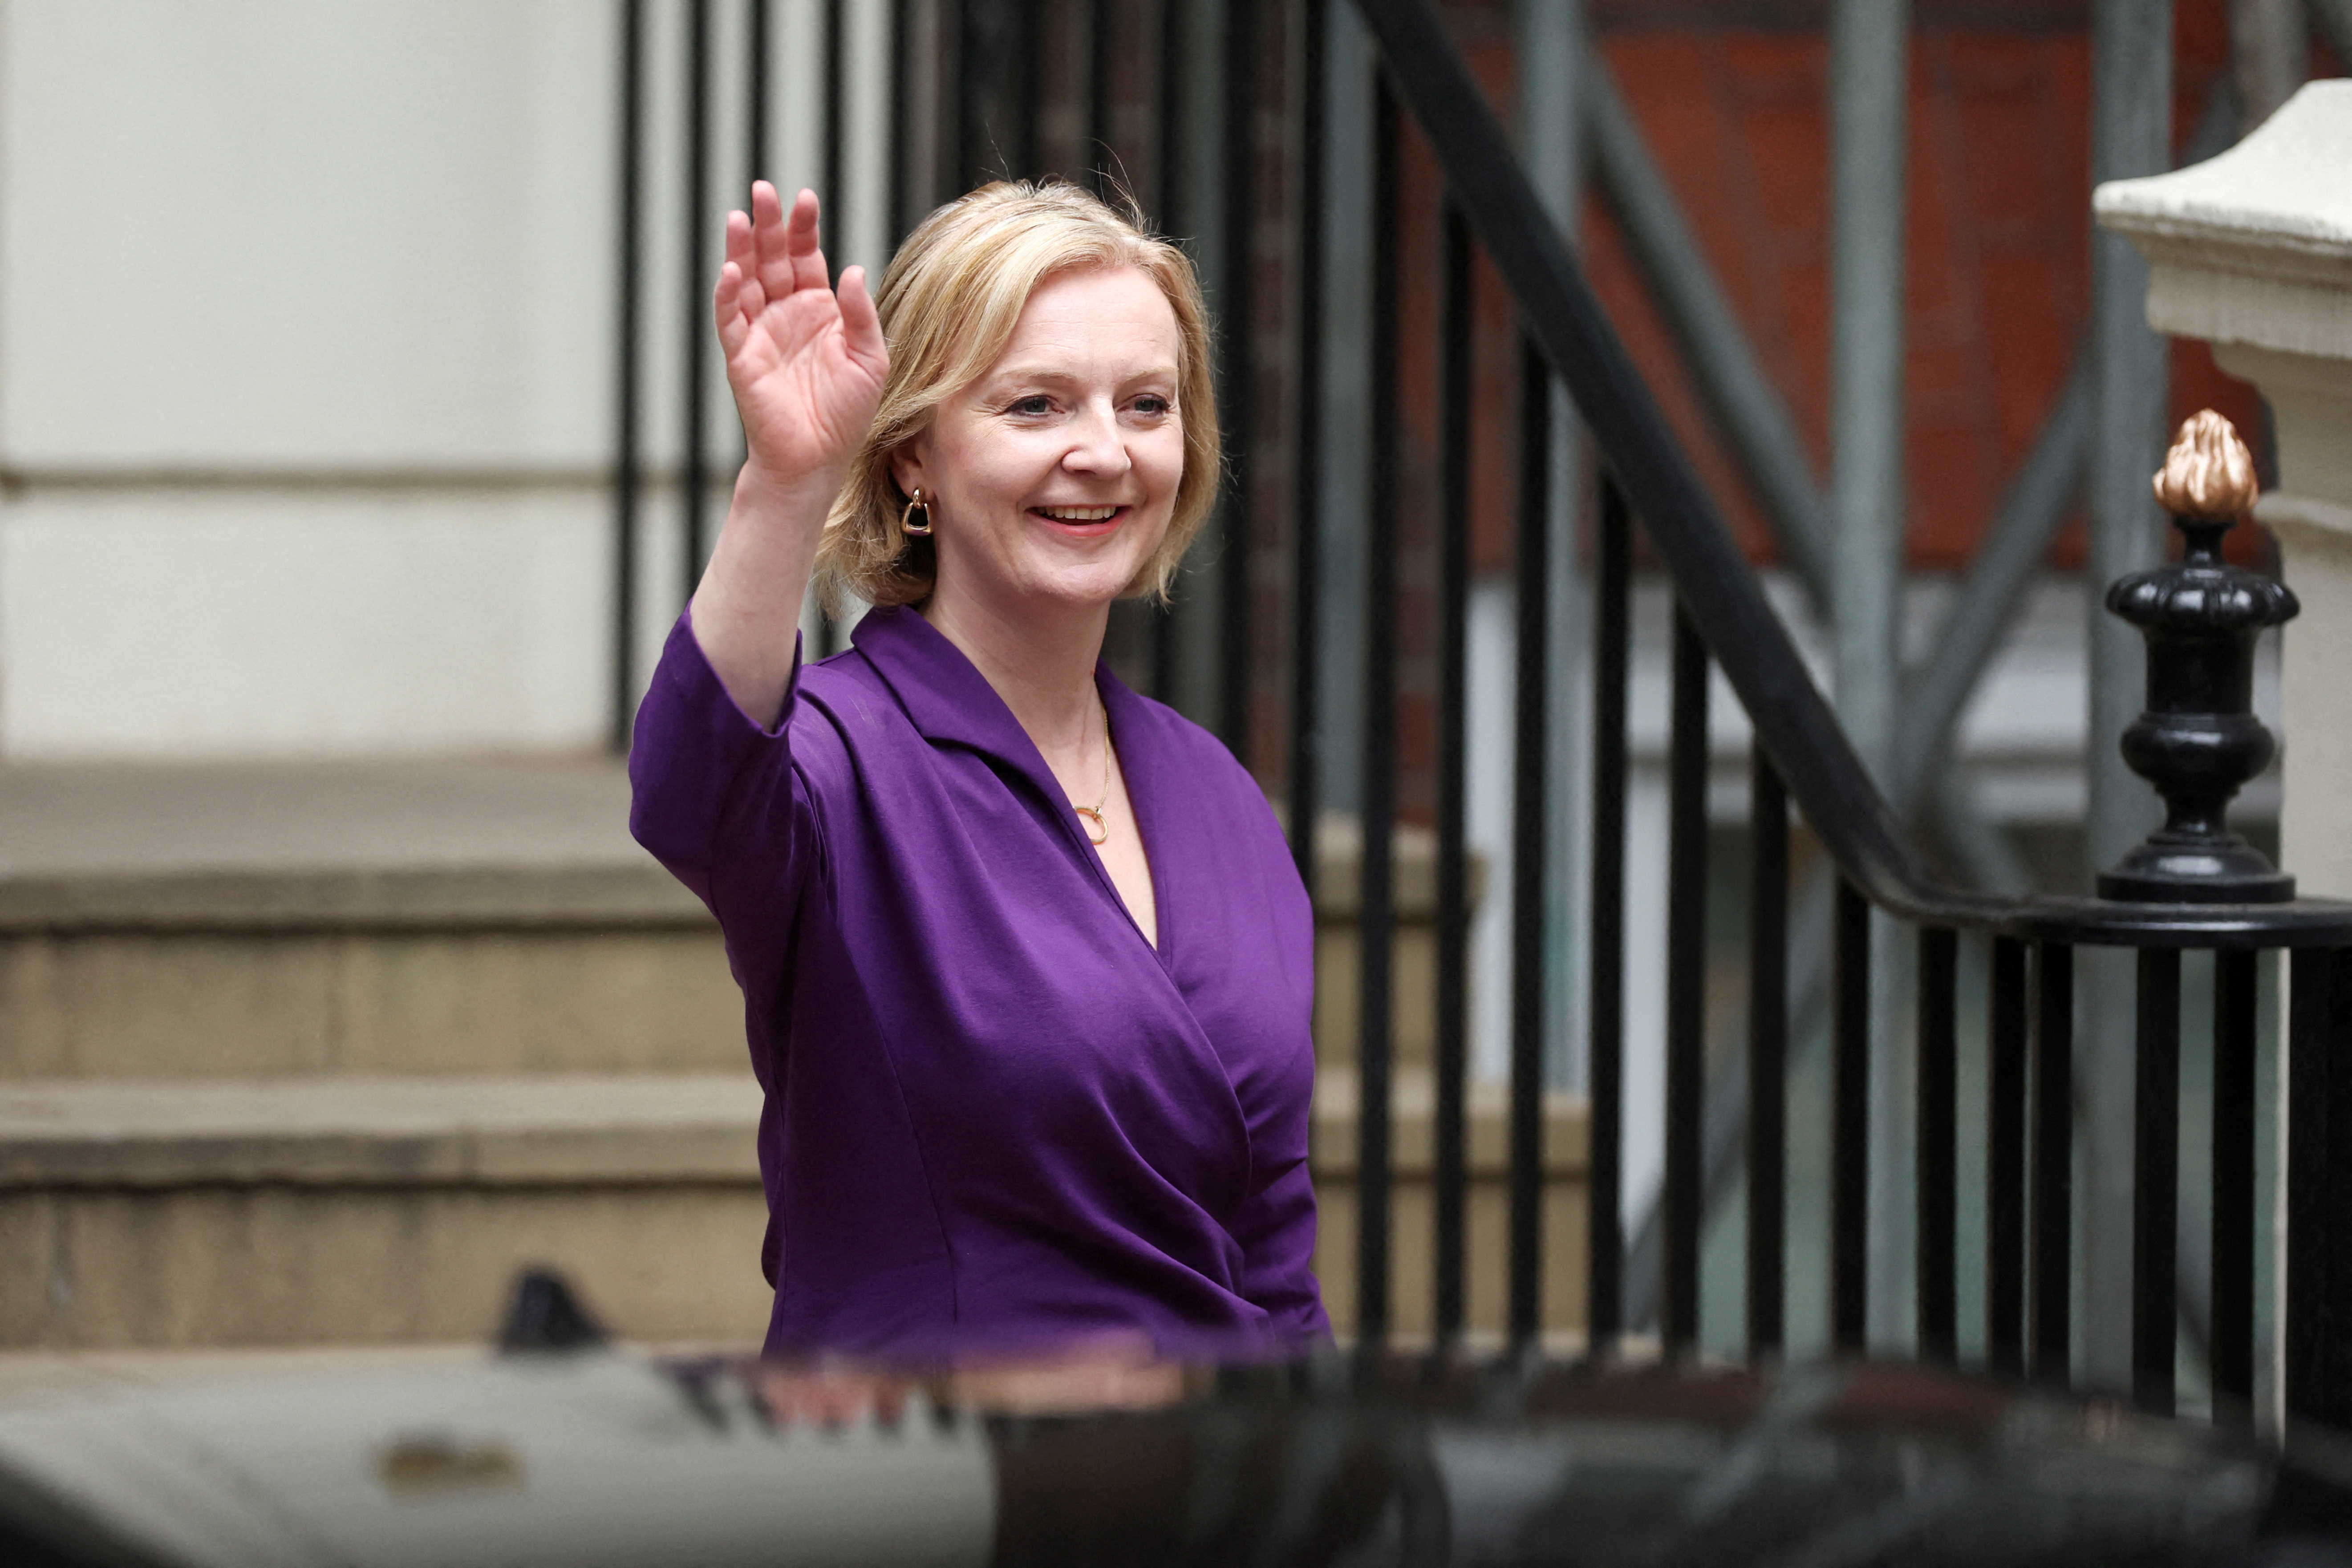 Liz Truss will be the third woman to head the British government